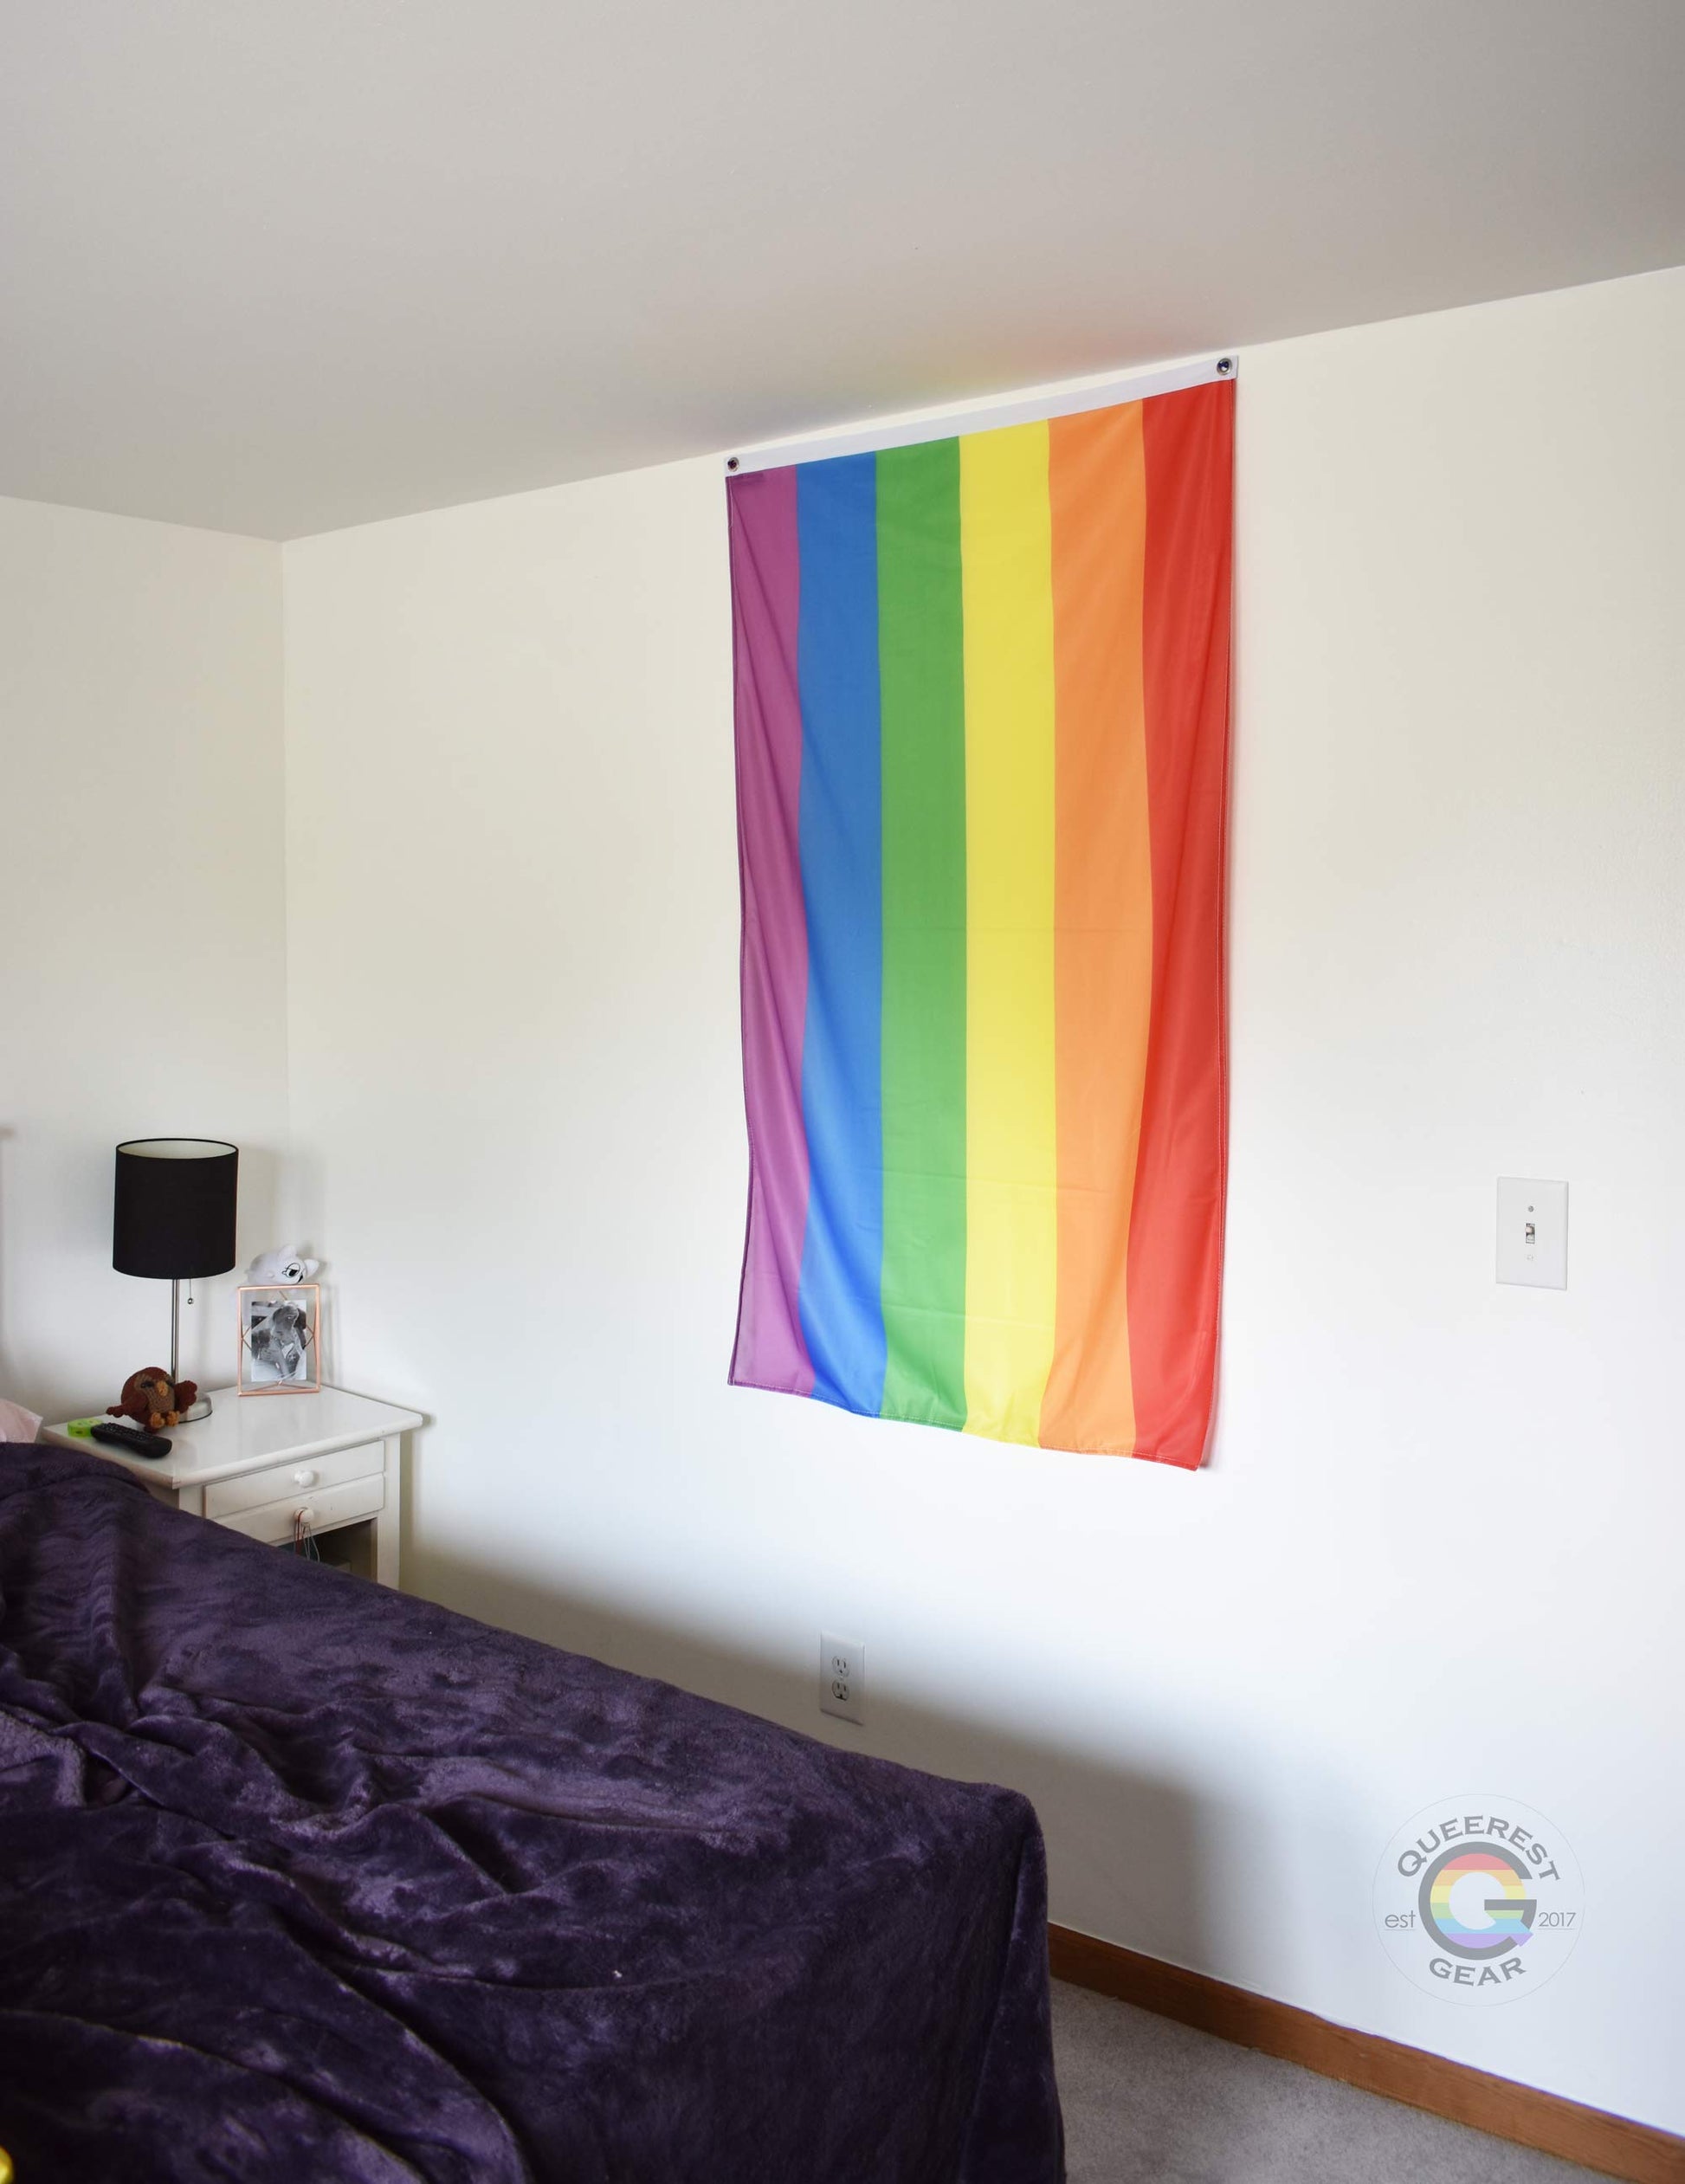  3’x5’ rainbow flag hanging vertically on the wall of a bedroom with a nightstand and a bed